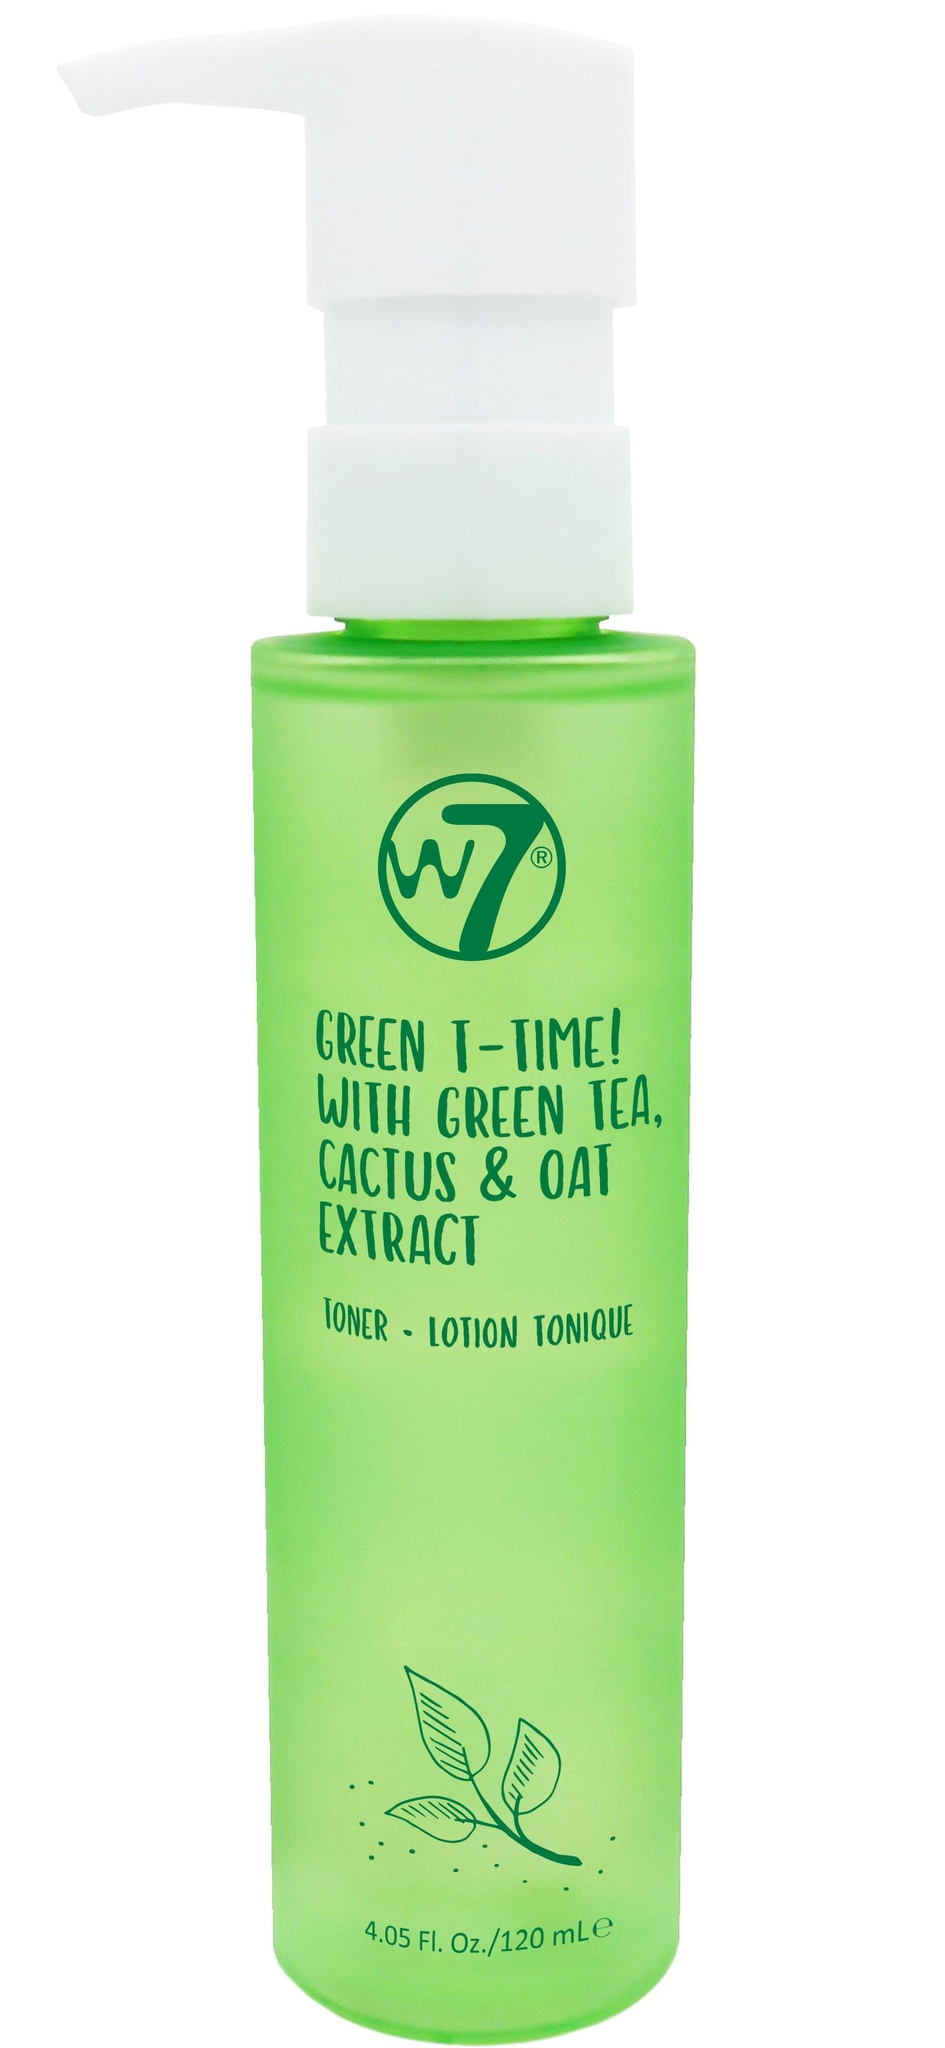 W7 Green T-time! Toner